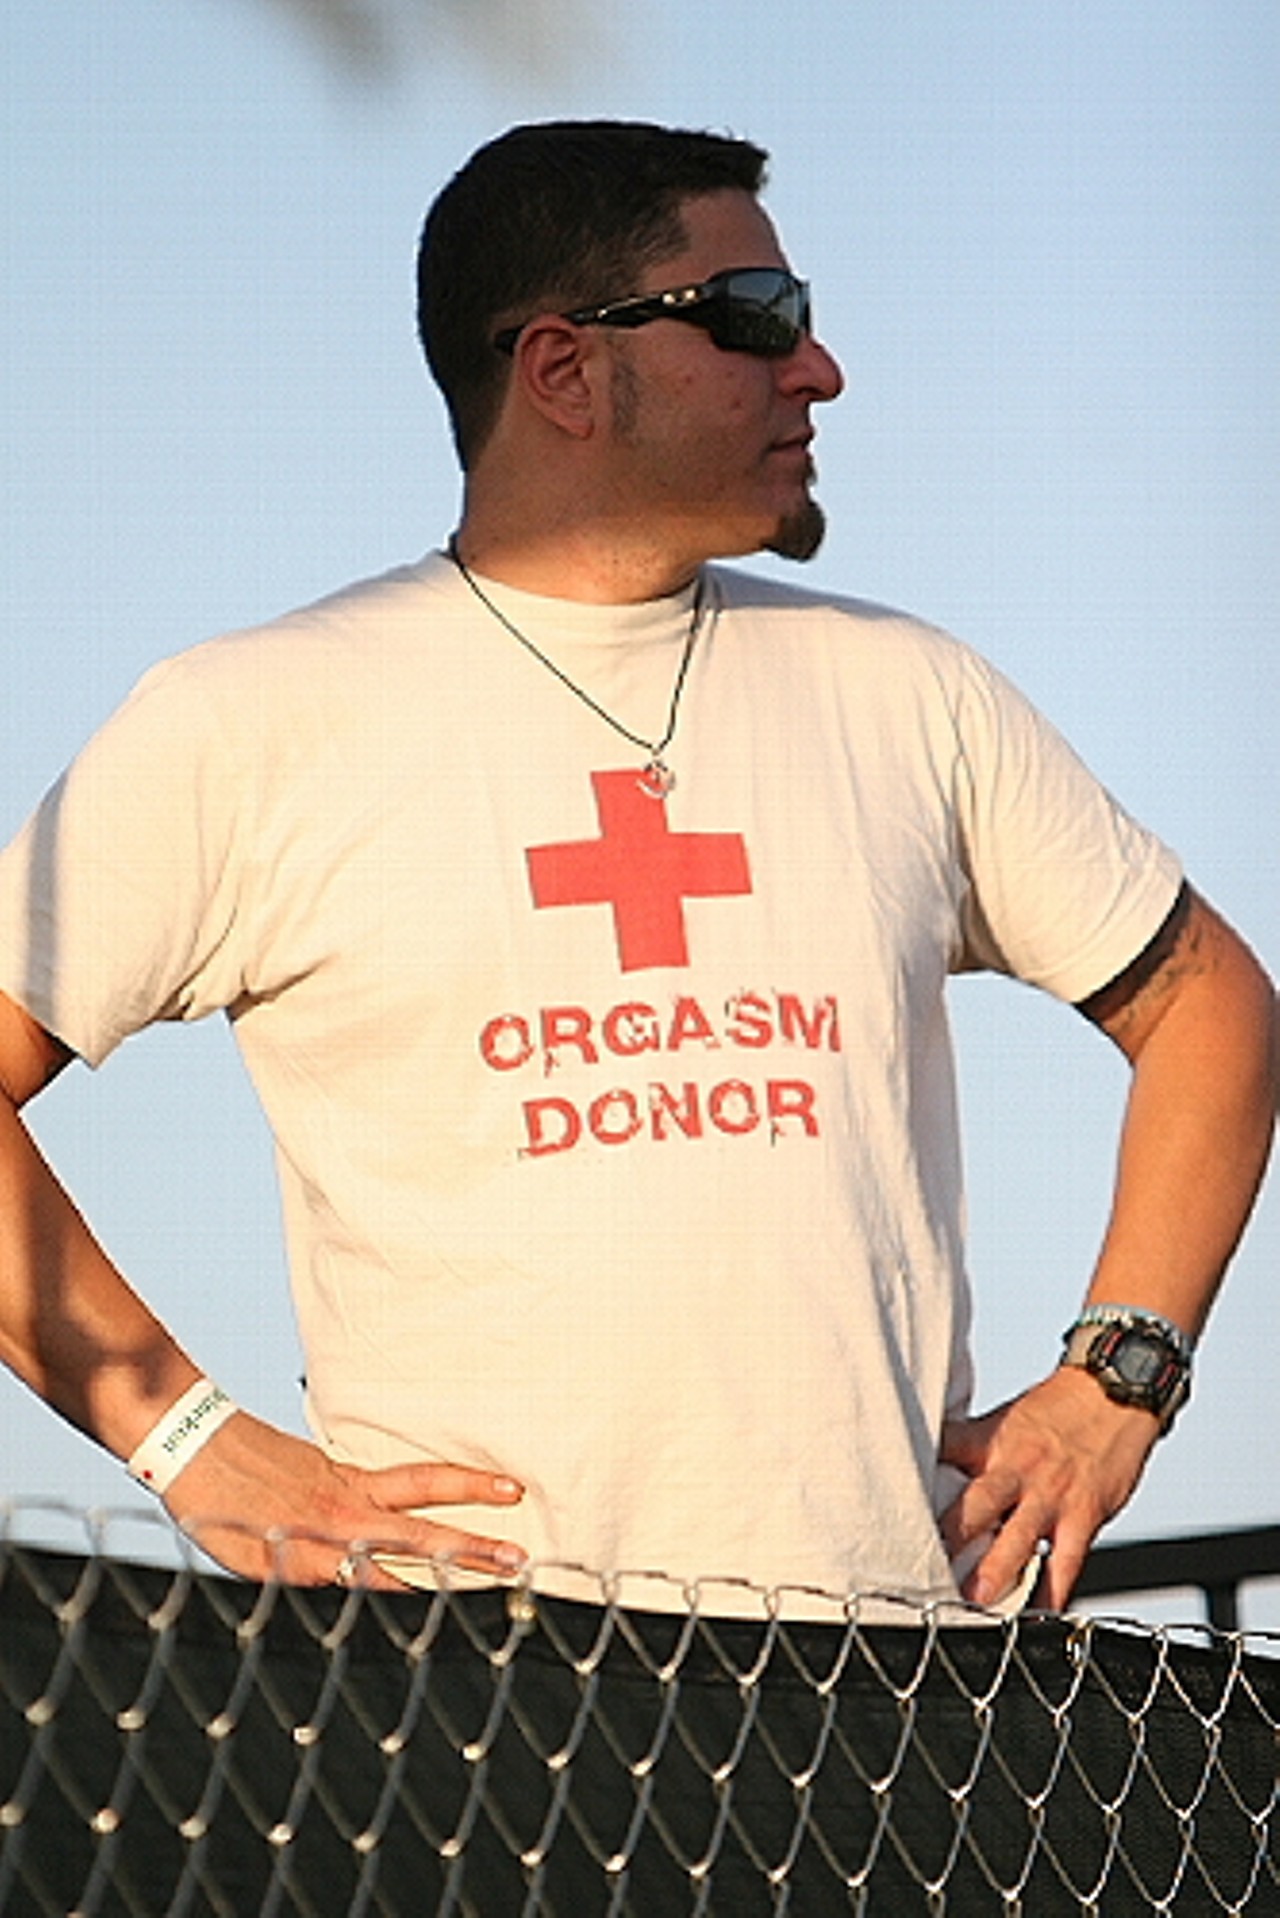 Donor in the crowd